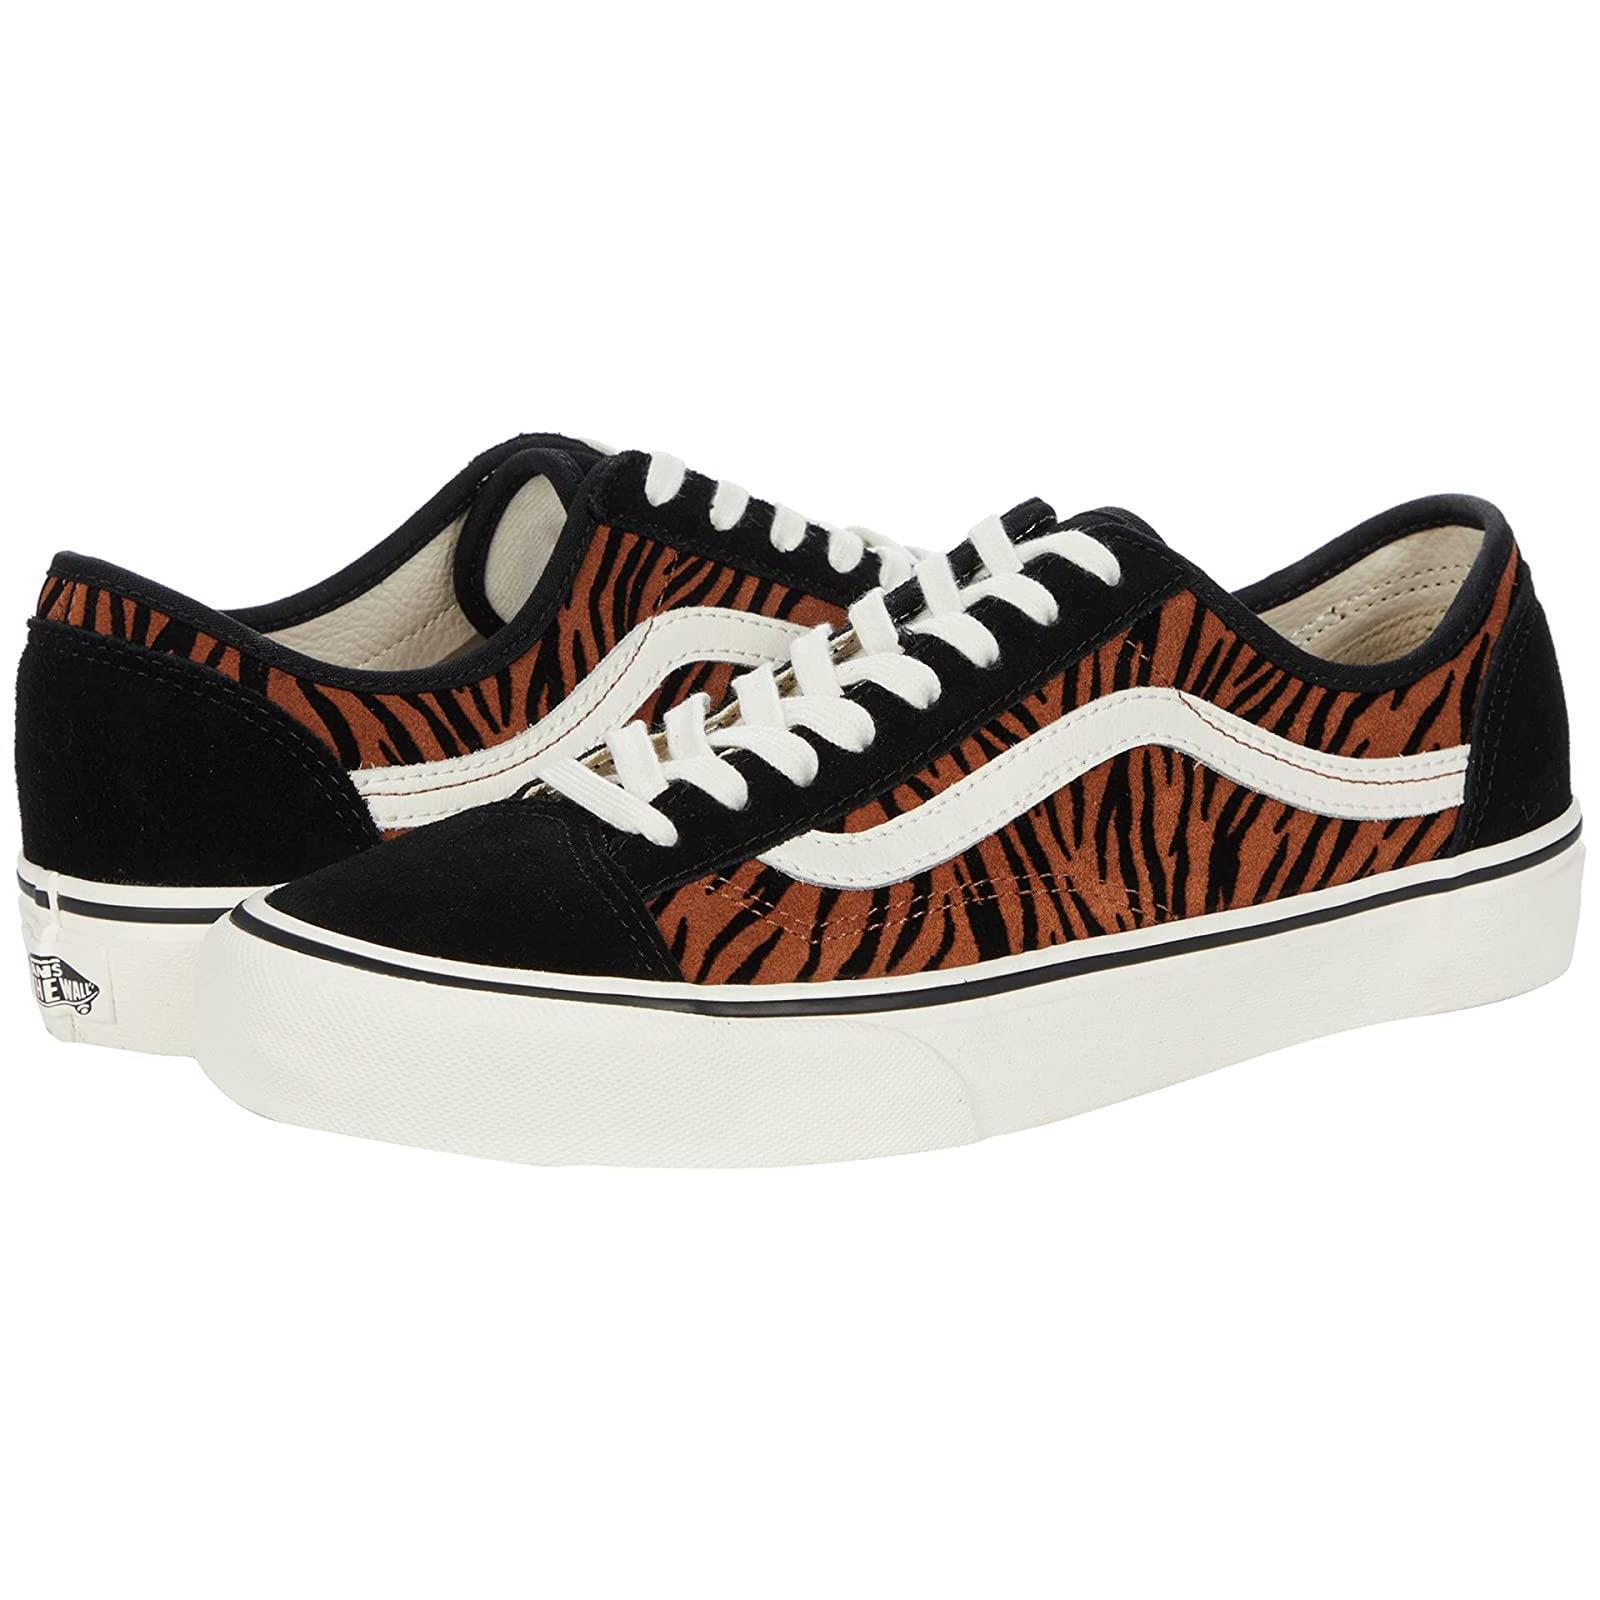 Unisex Sneakers Athletic Shoes Vans Style 36 Decon SF (Animal Stripes) Black/Marshmallow